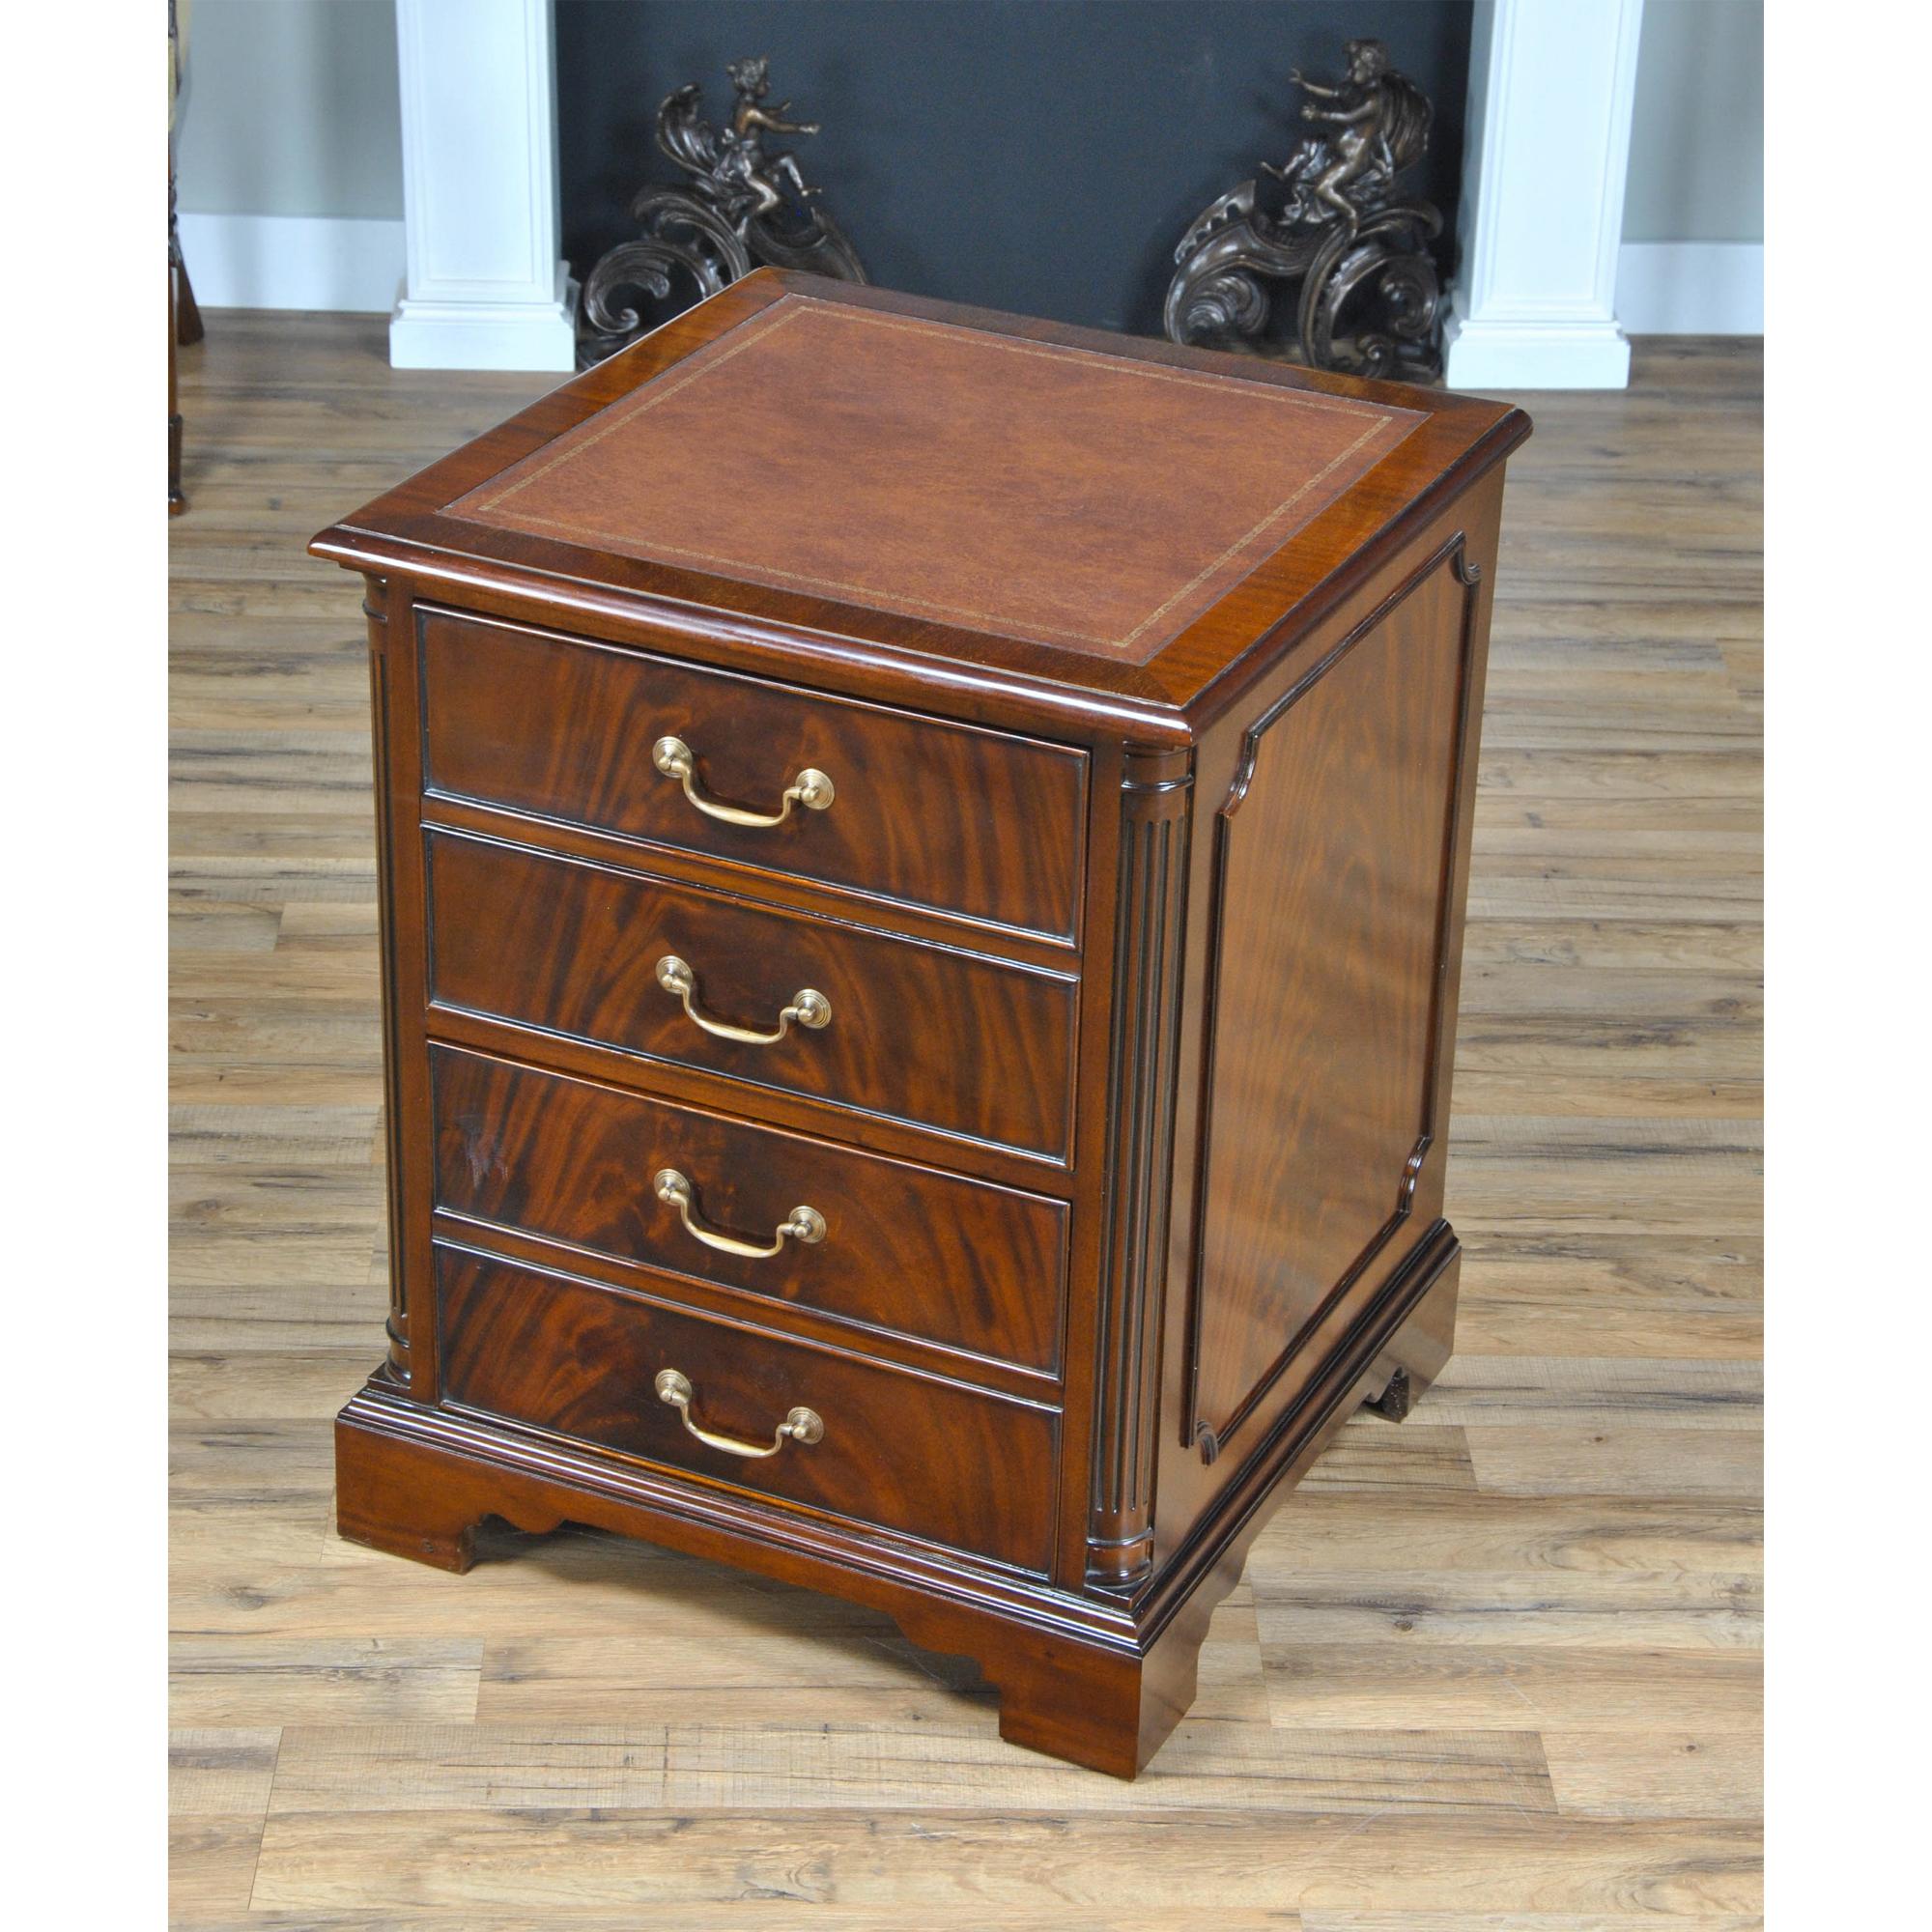 A high quality piece of office furniture from Niagara Furniture our Two Drawer File Cabinet is made with figured mahogany. The top of the cabinet is covered in a full grain brown leather panel which is attractively tooled around the edge with gold